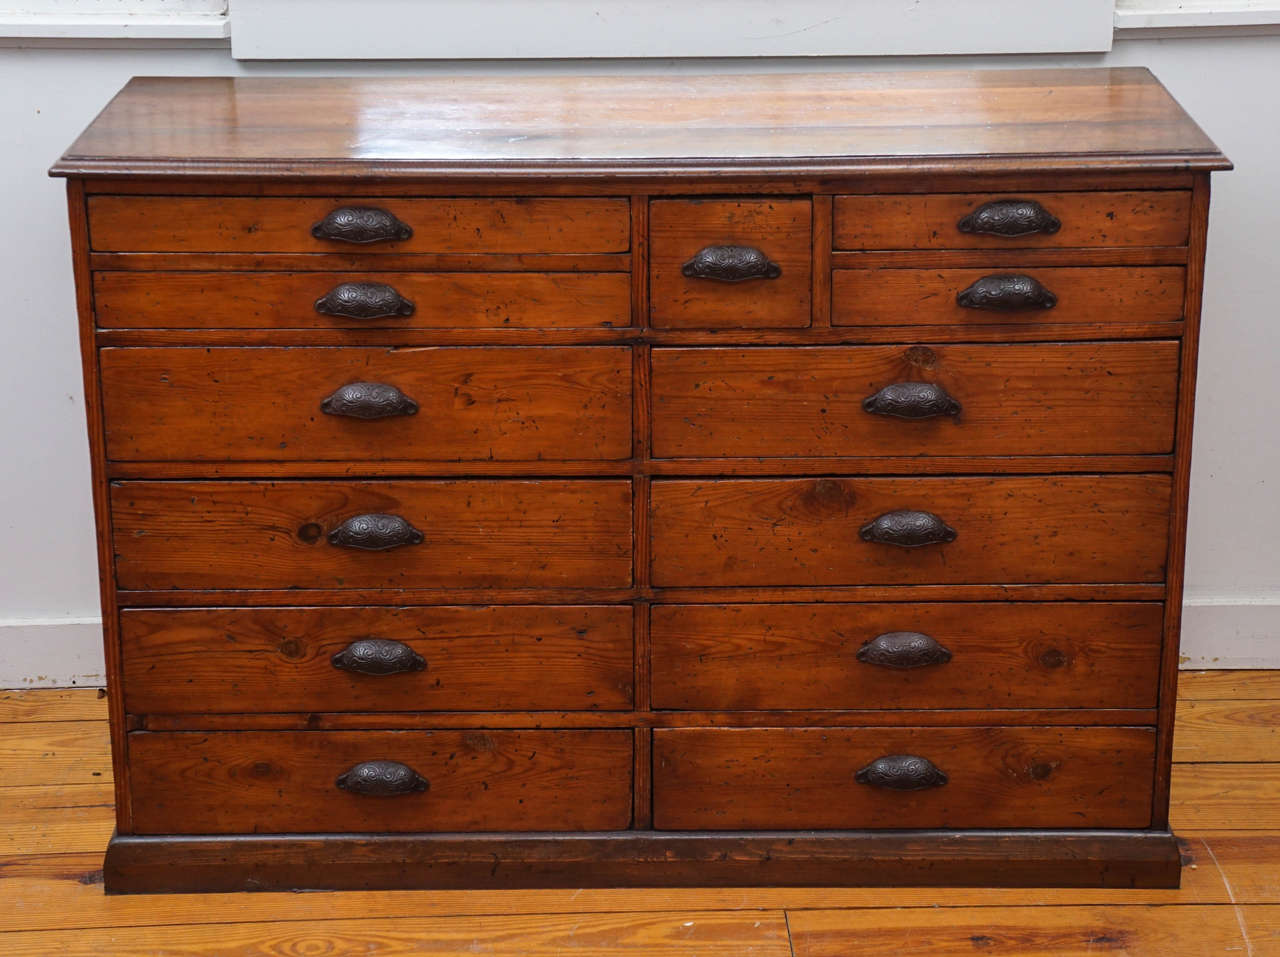 This English bank of drawers has its most unique attribute when you open some of the drawers which have partitions. The patina is very, very rich and the hardware is original. We love multi drawer pieces at Painted Porch.